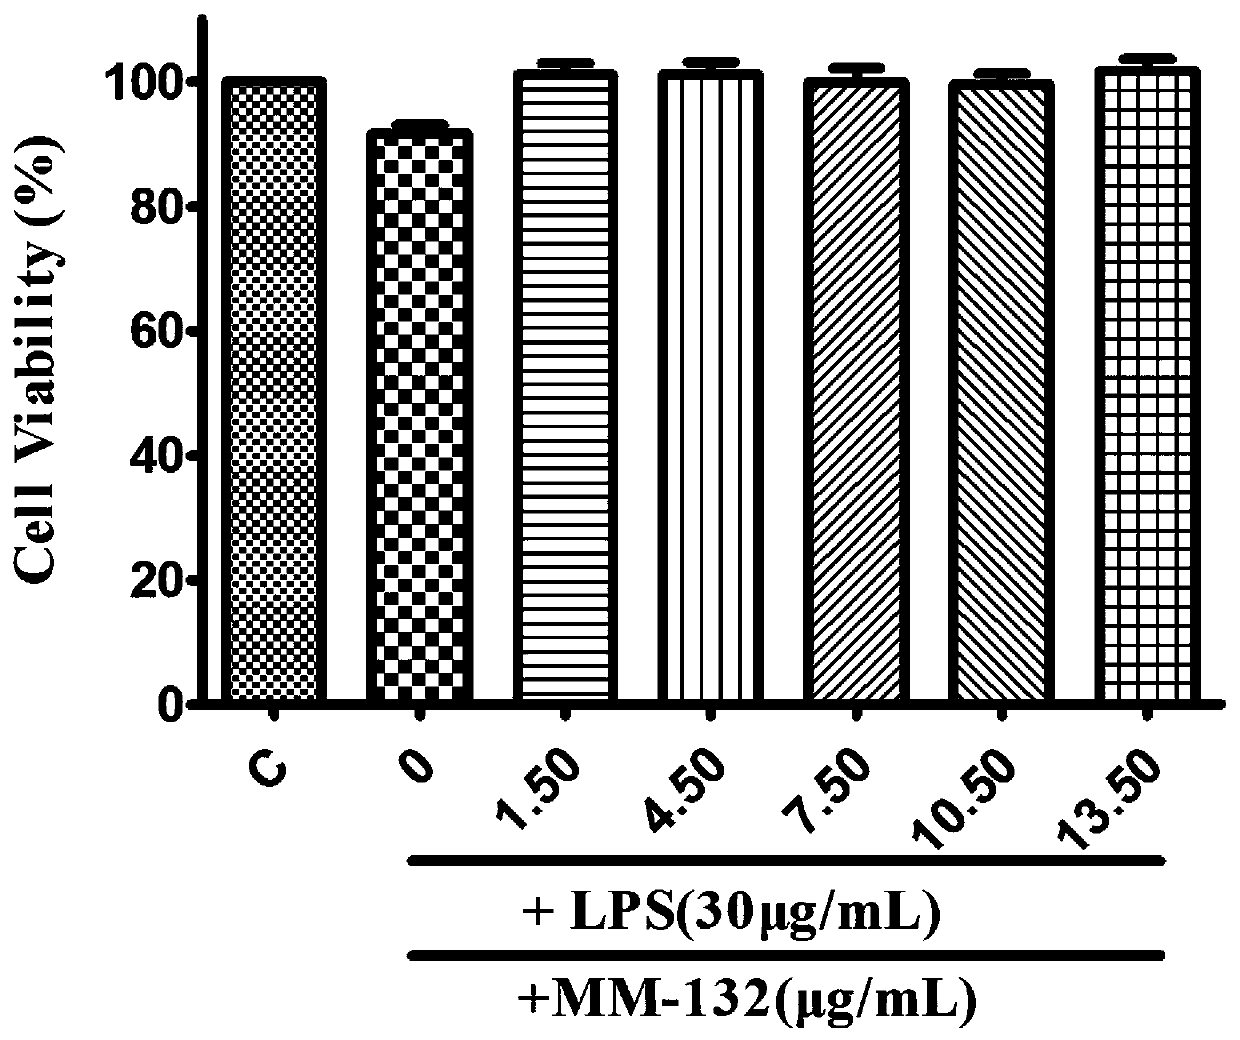 Application of a phenylpropanoid compound and a pharmaceutically acceptable salt thereof in the preparation of medicines for treating inflammatory diseases